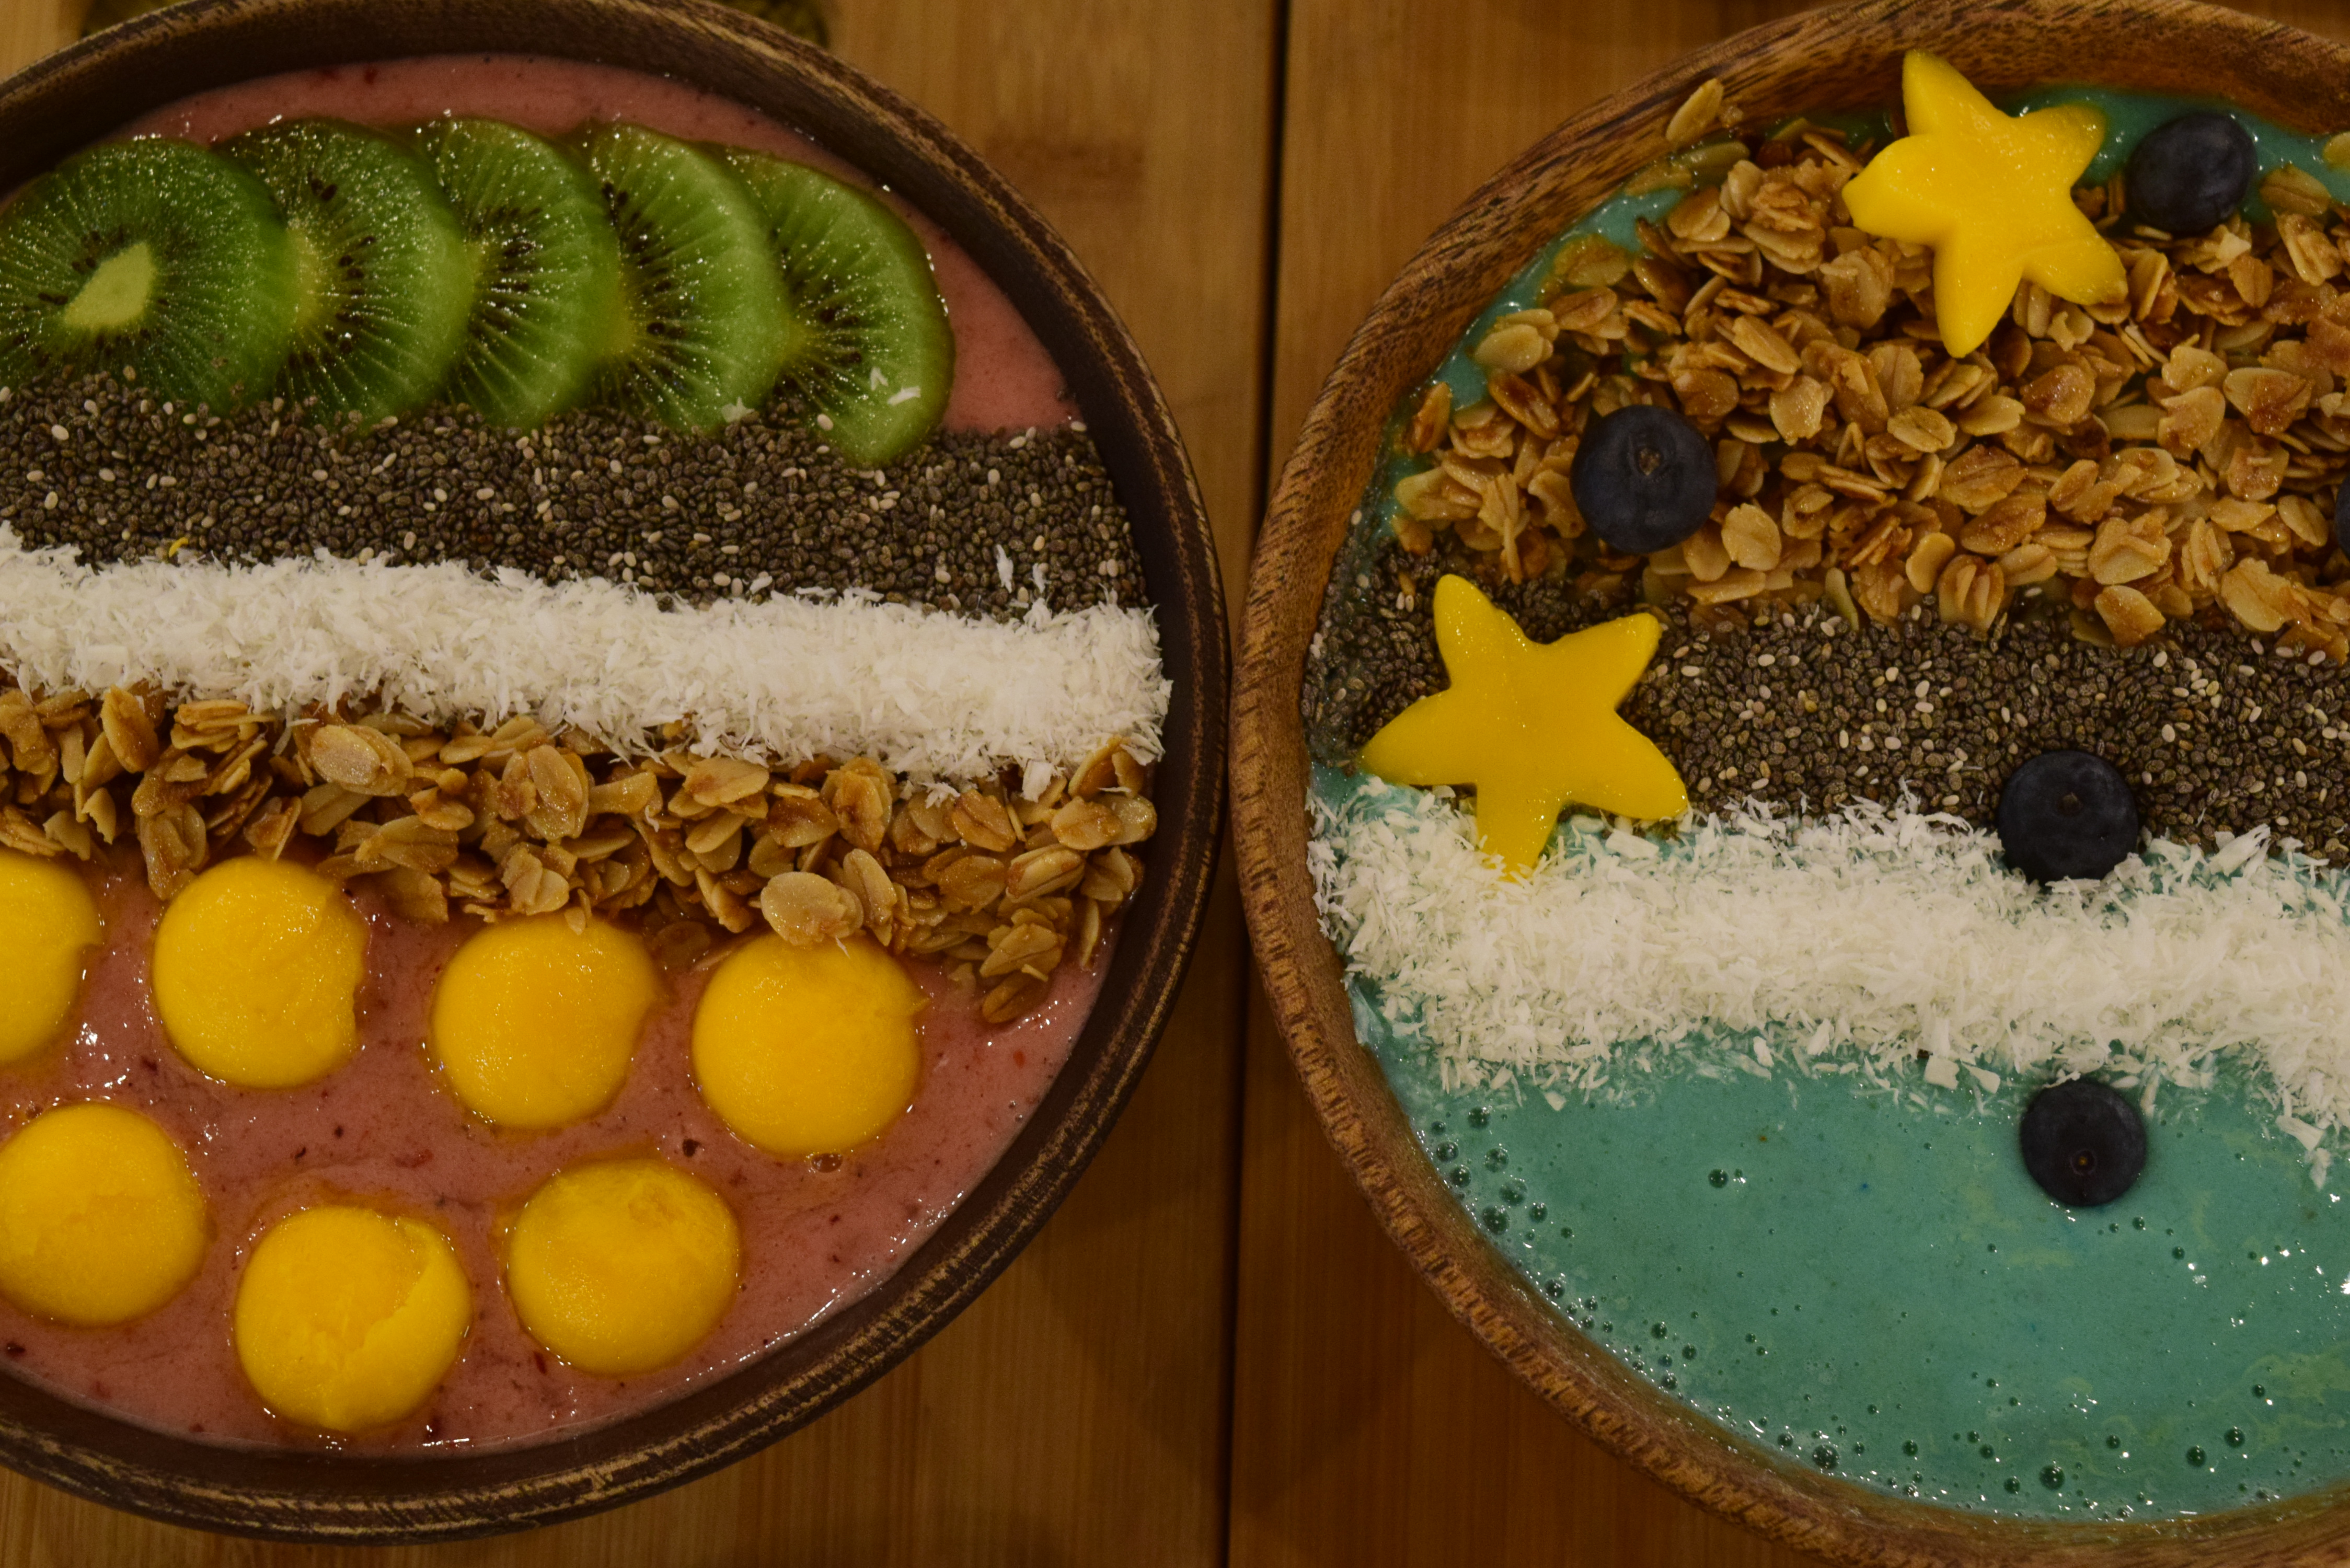 Their smoothie bowls are quite popular in their healthy menu options.